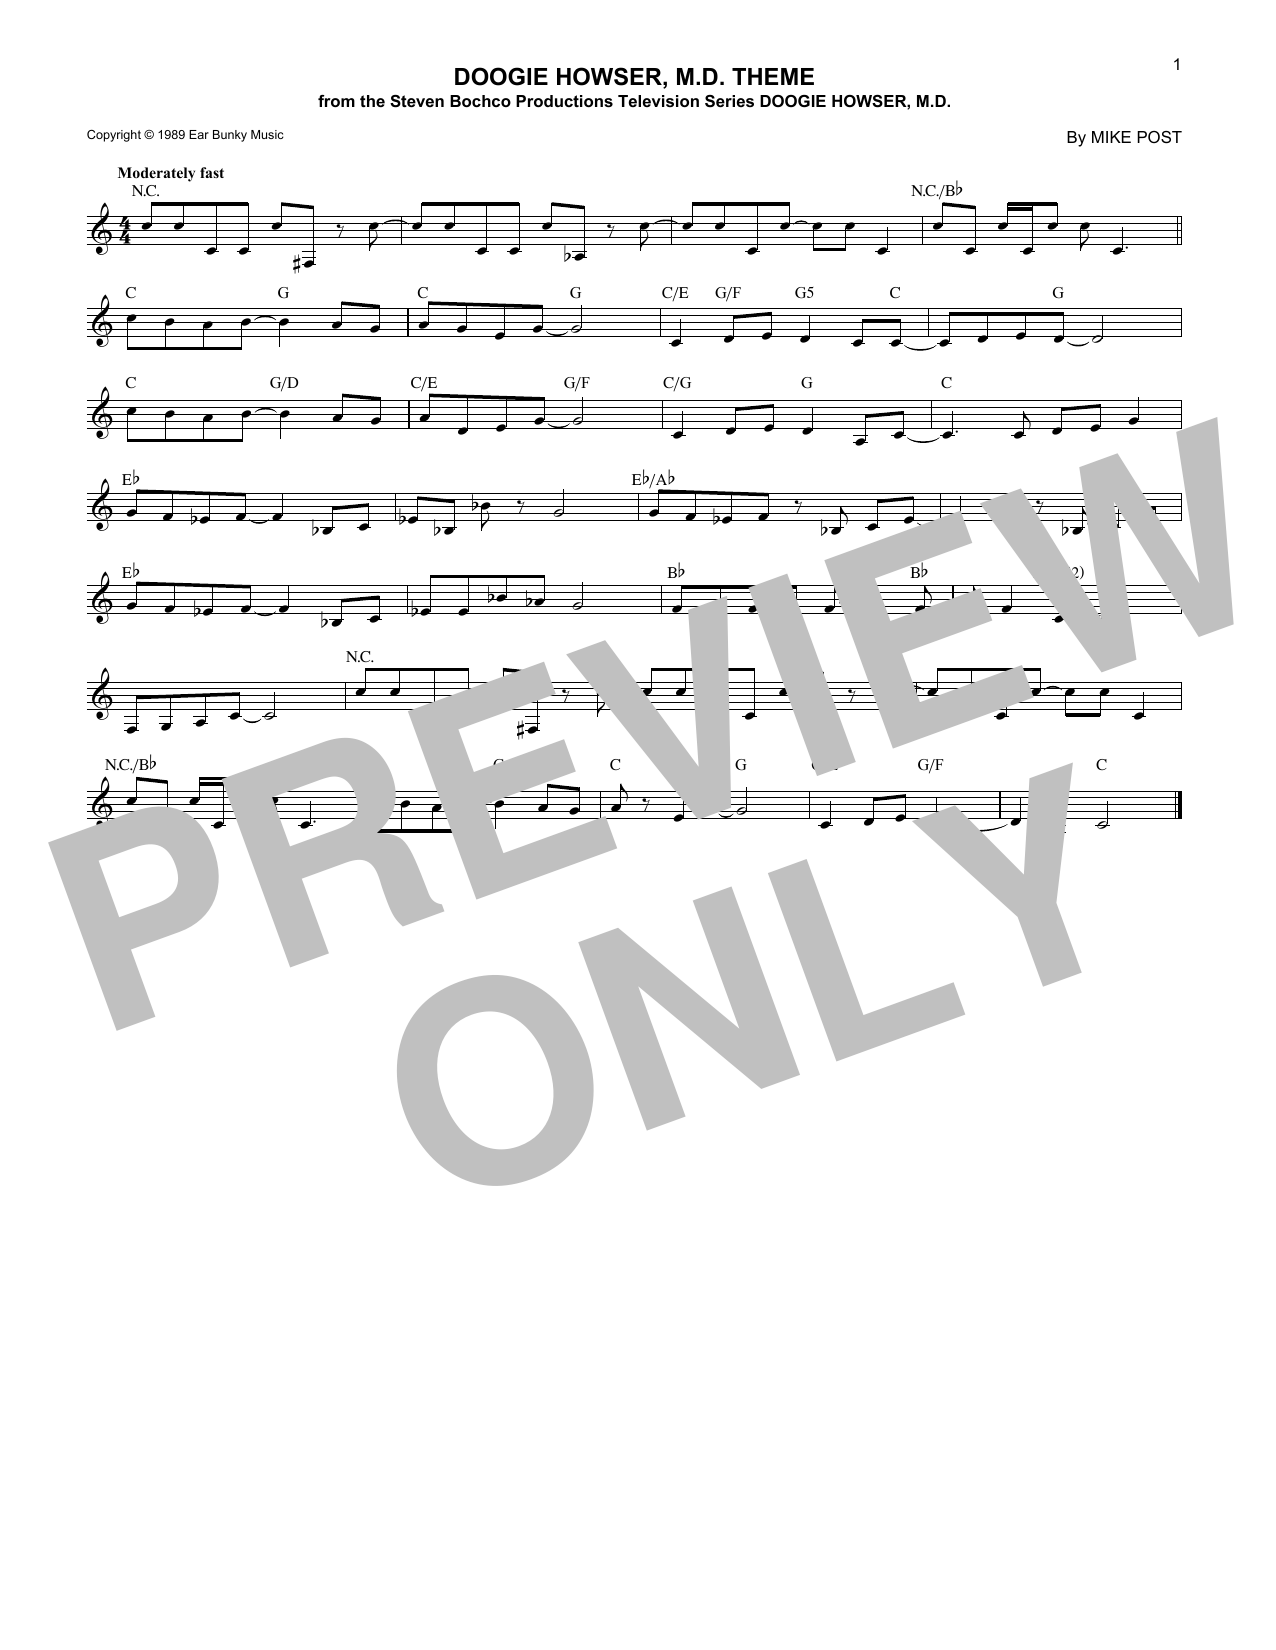 Download Mike Post Doogie Howser, M.D. Theme Sheet Music